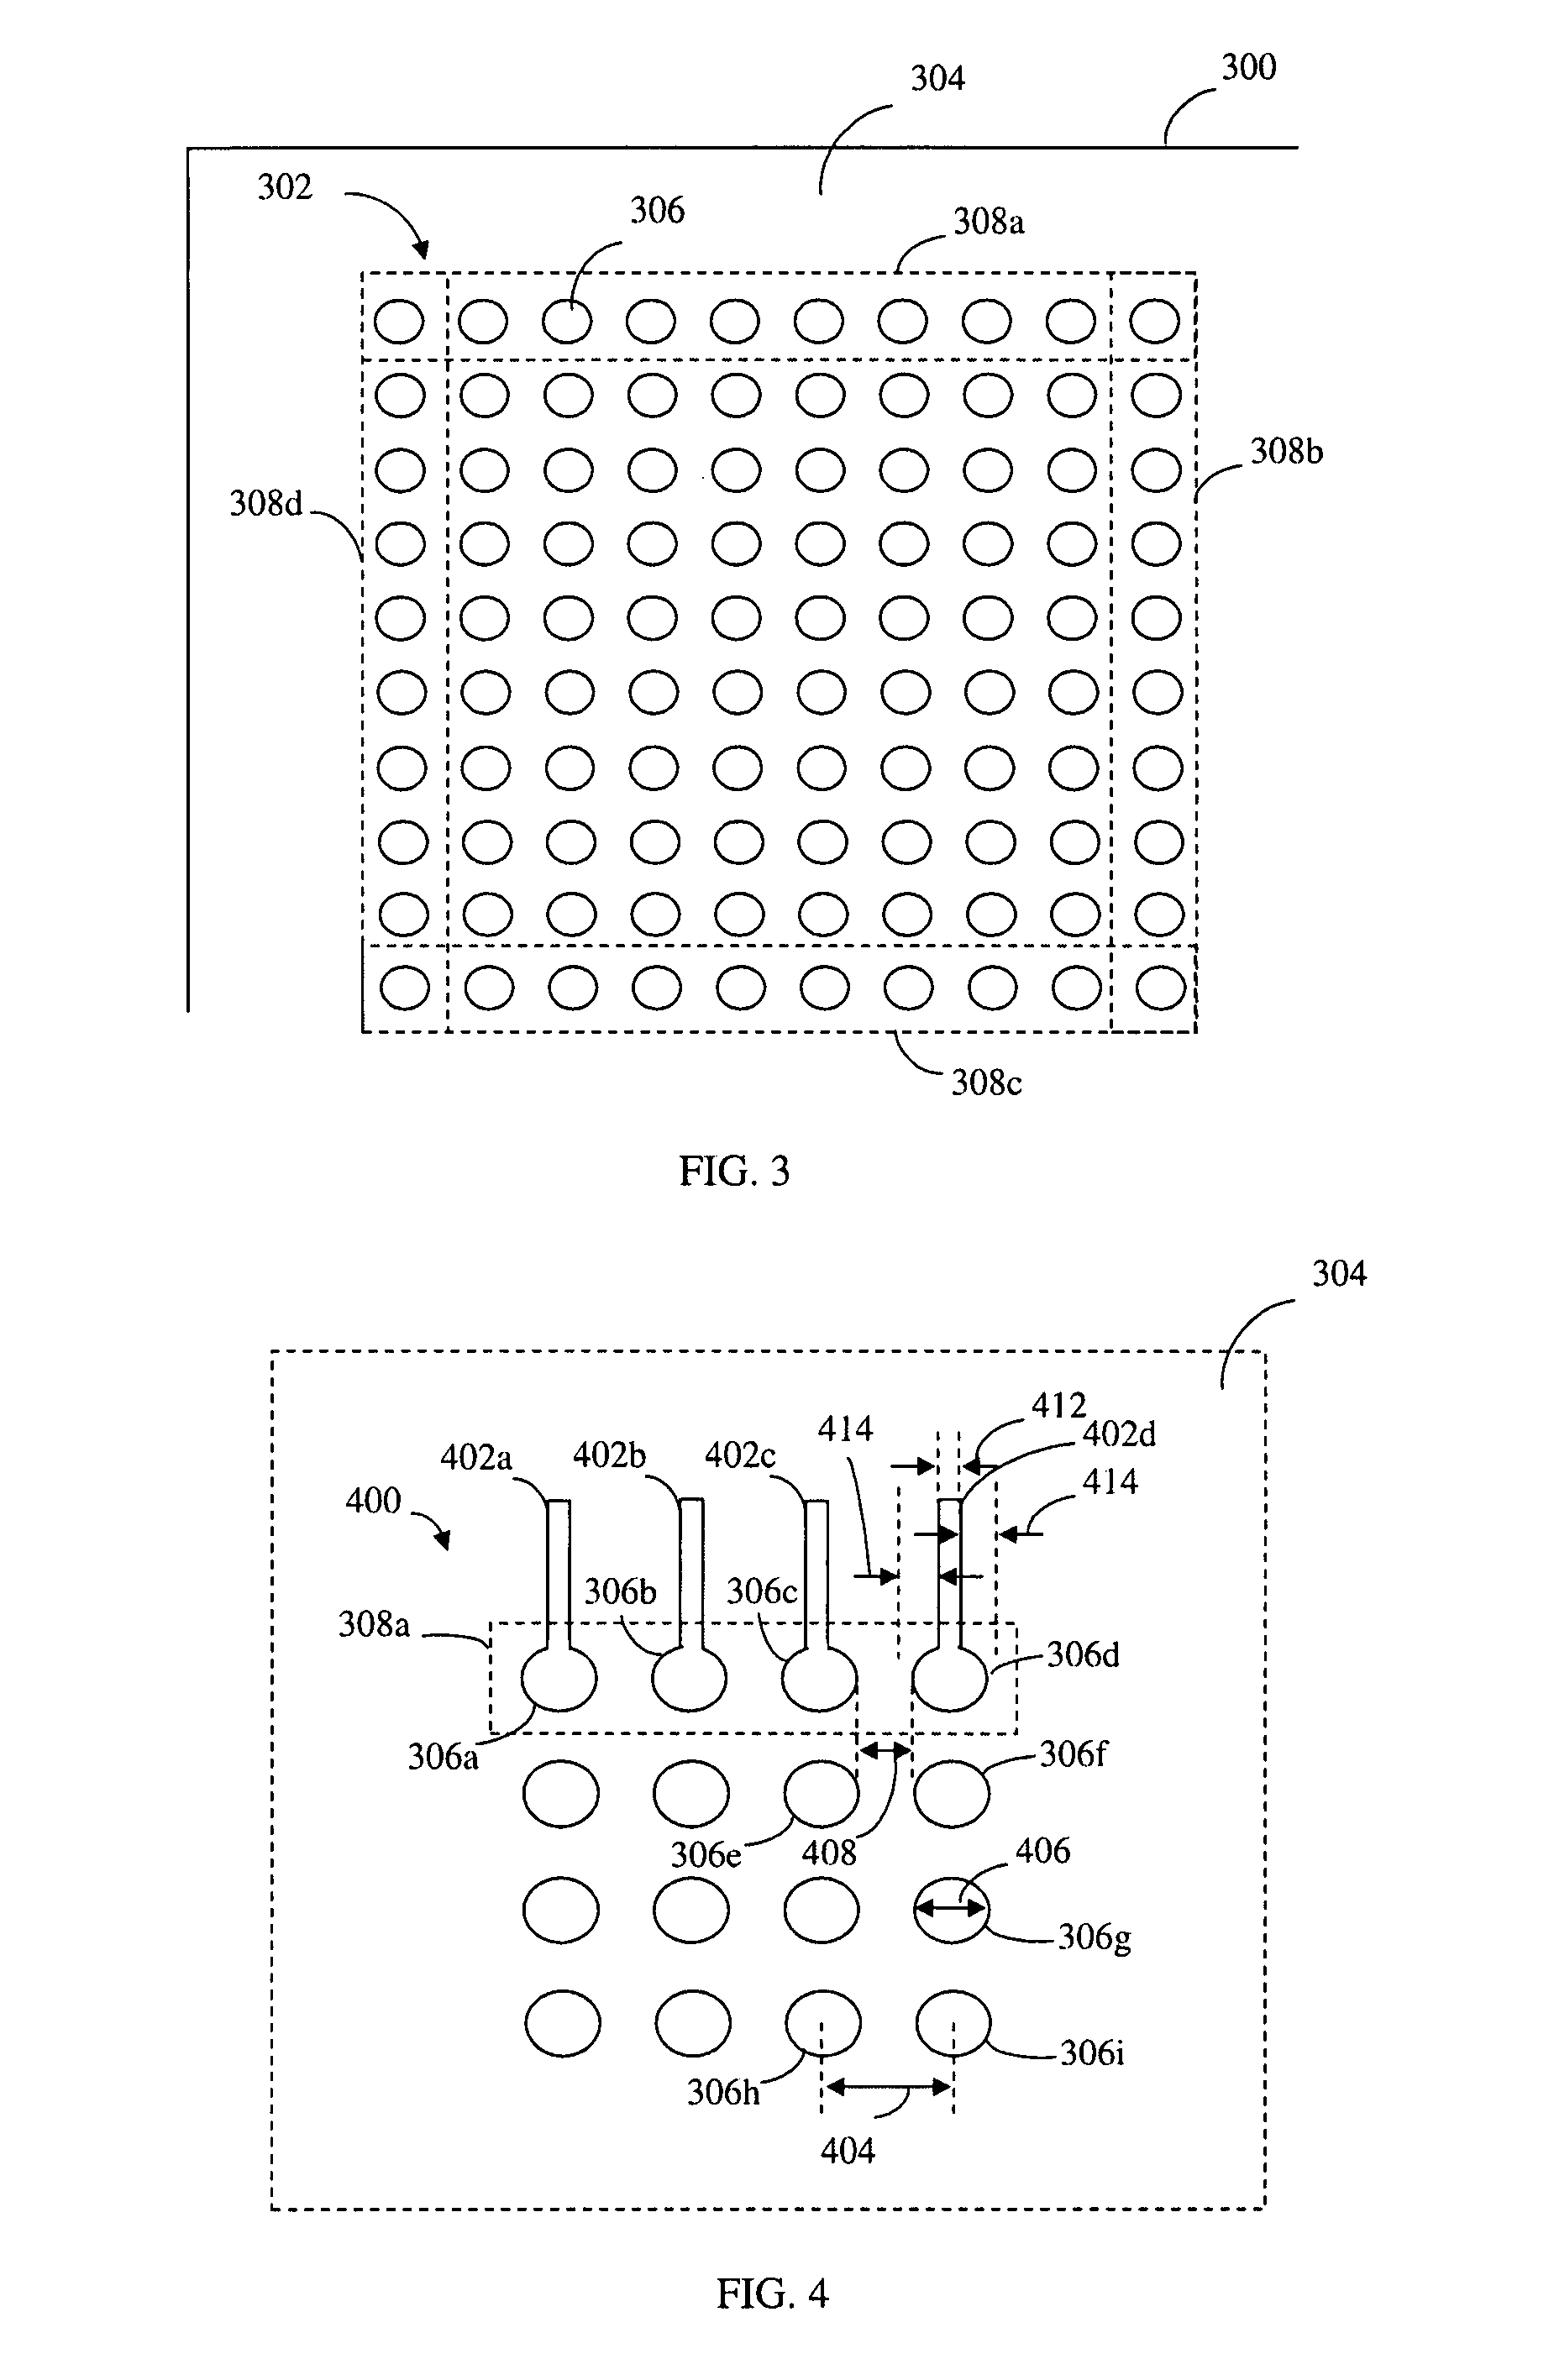 Oblong peripheral solder ball pads on a printed circuit board for mounting a ball grid array package